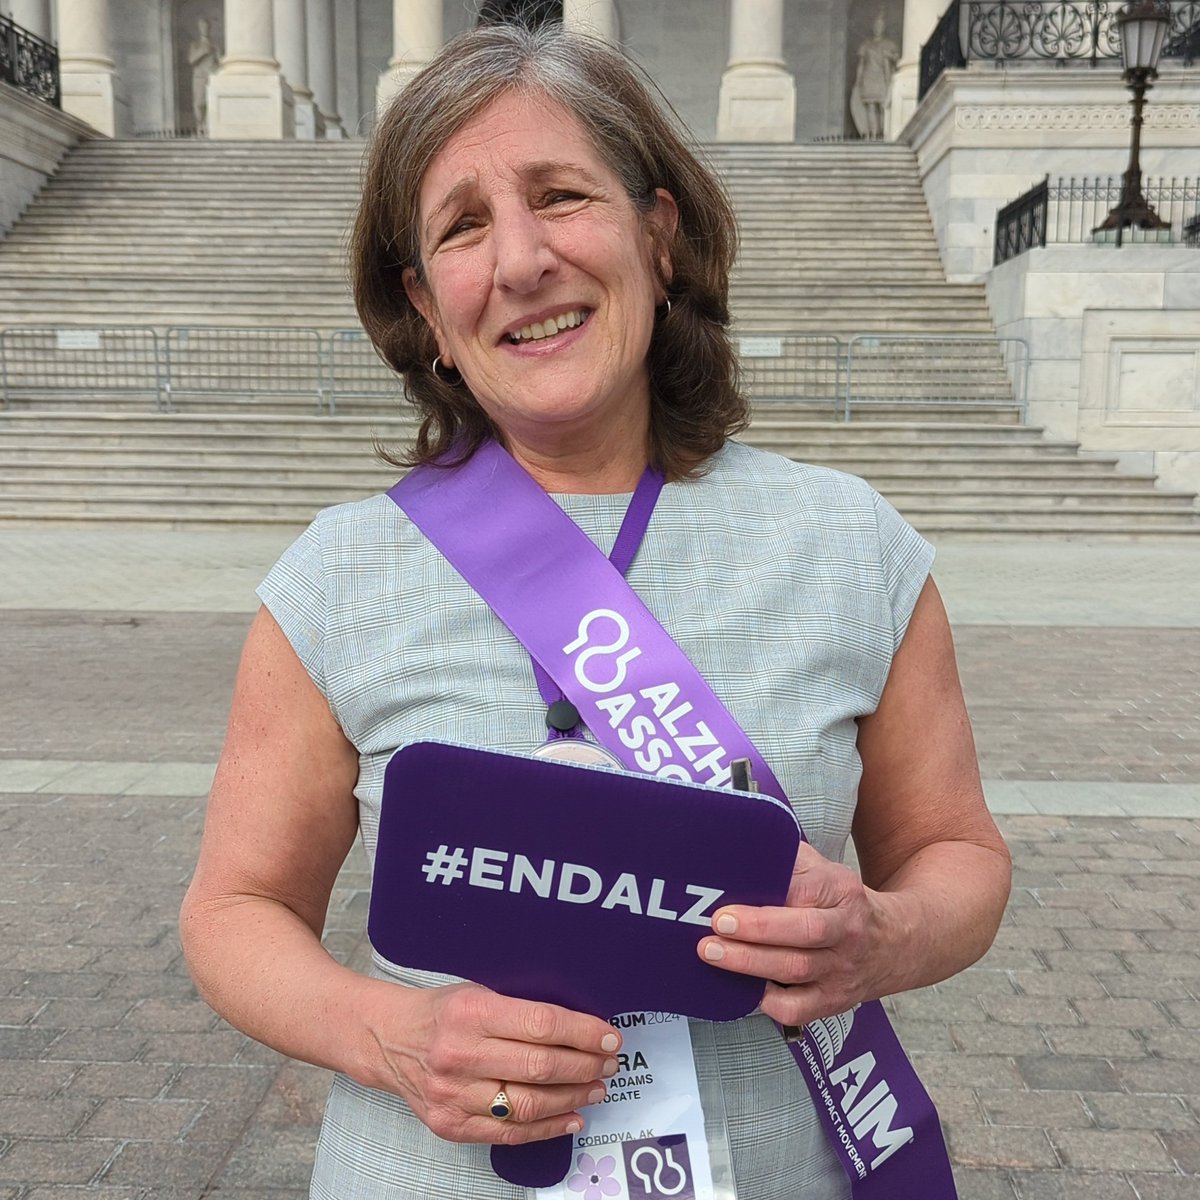 'I'm advocating for my husband who passed away six years ago from Alzheimer's and for all those in Cordova, our tiny rural community, that is disportionately impacted by dementia. Let's #ENDALZ by the next eclipse!' Join Debra of Alaska in raising your voice for your community…